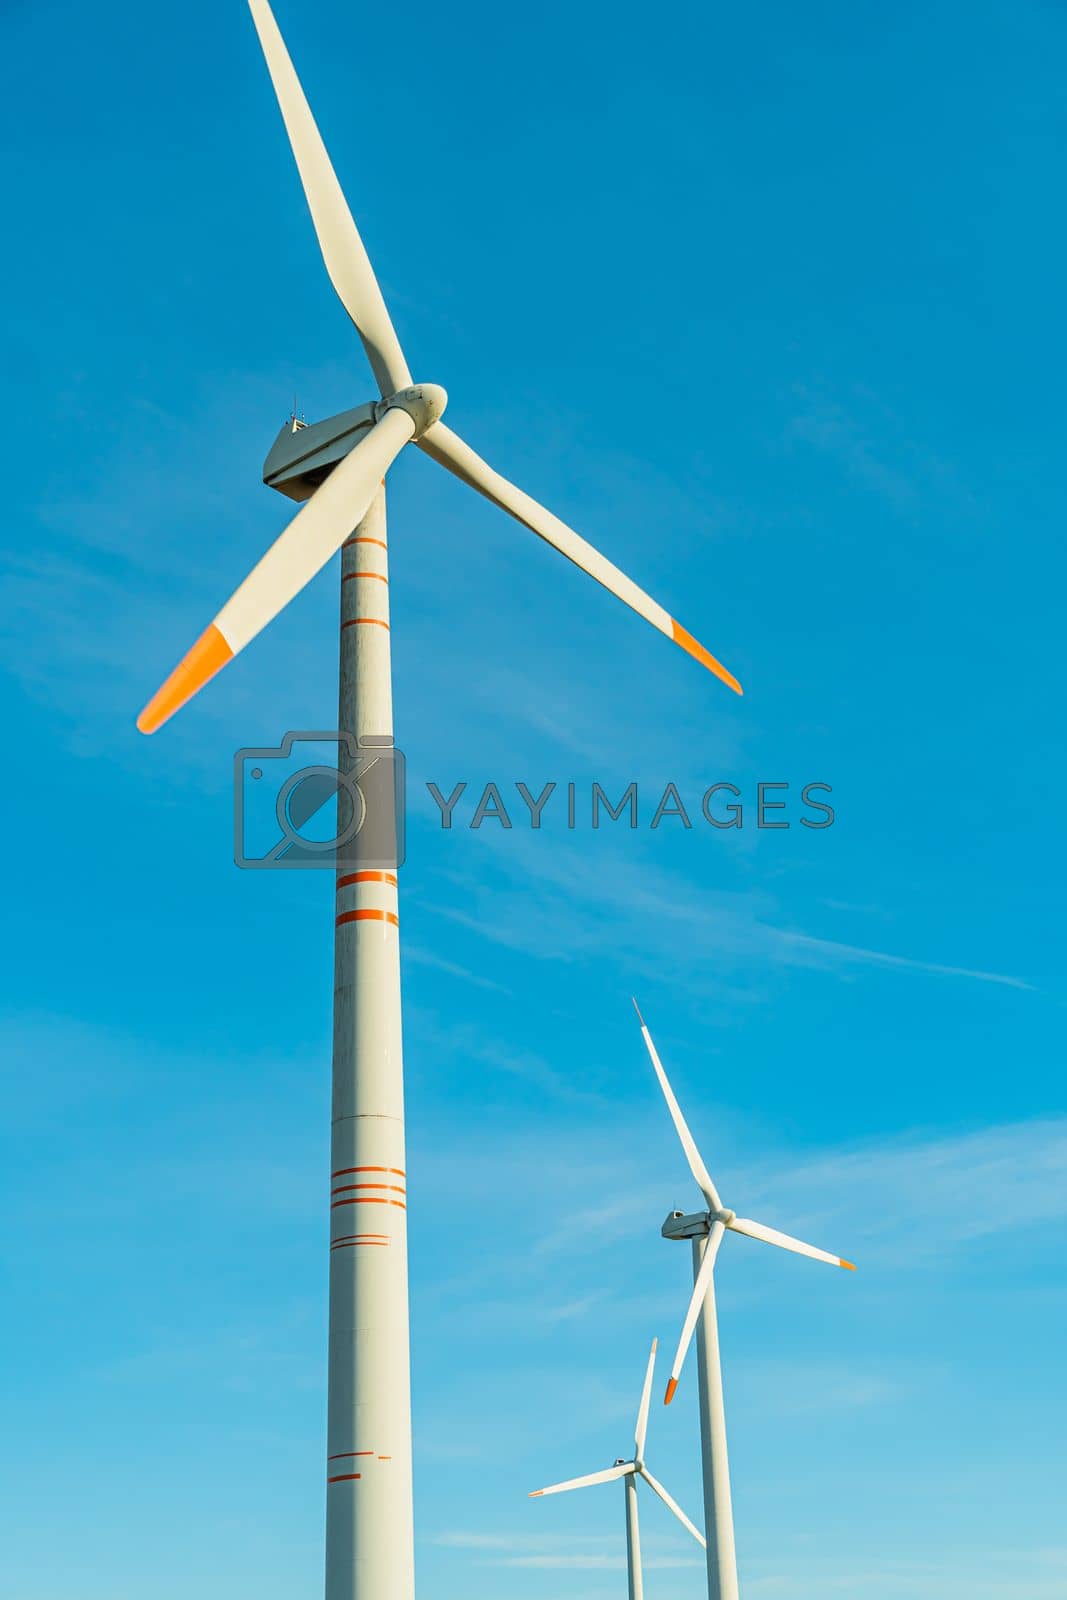 Royalty free image of Green energy on wind turbines and wind turbines. Alternative energy sources and renewable energy sources. Power generation and generators of power plants.Wind farm and wind,environmental conservation by YevgeniySam